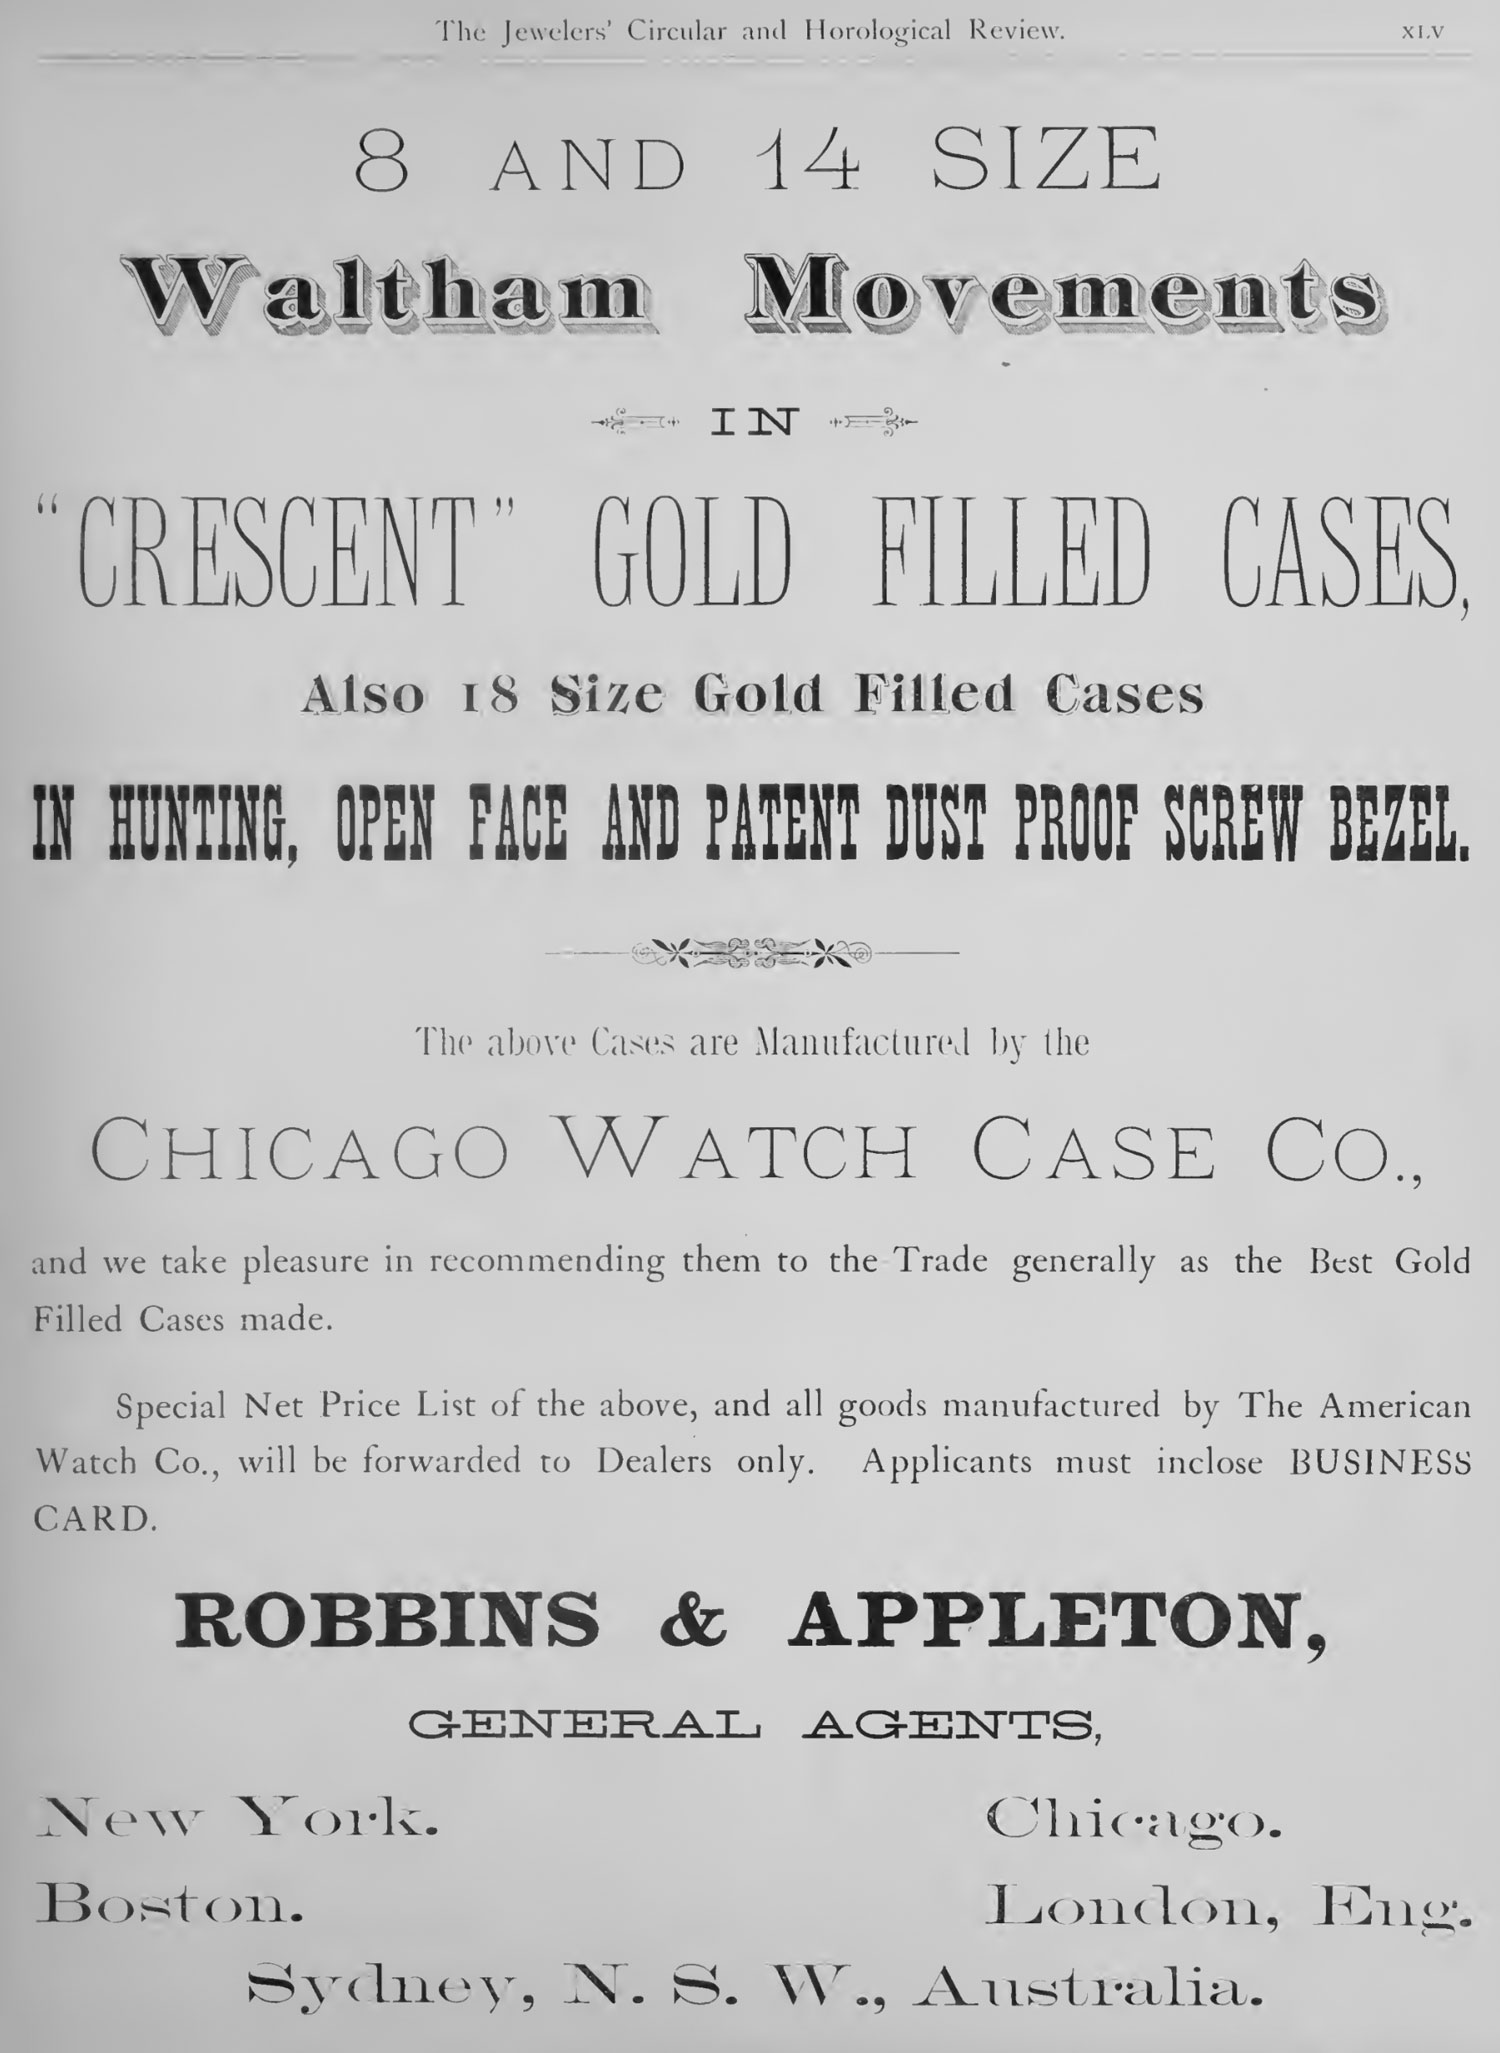 Chicago Watch Case Co. Image